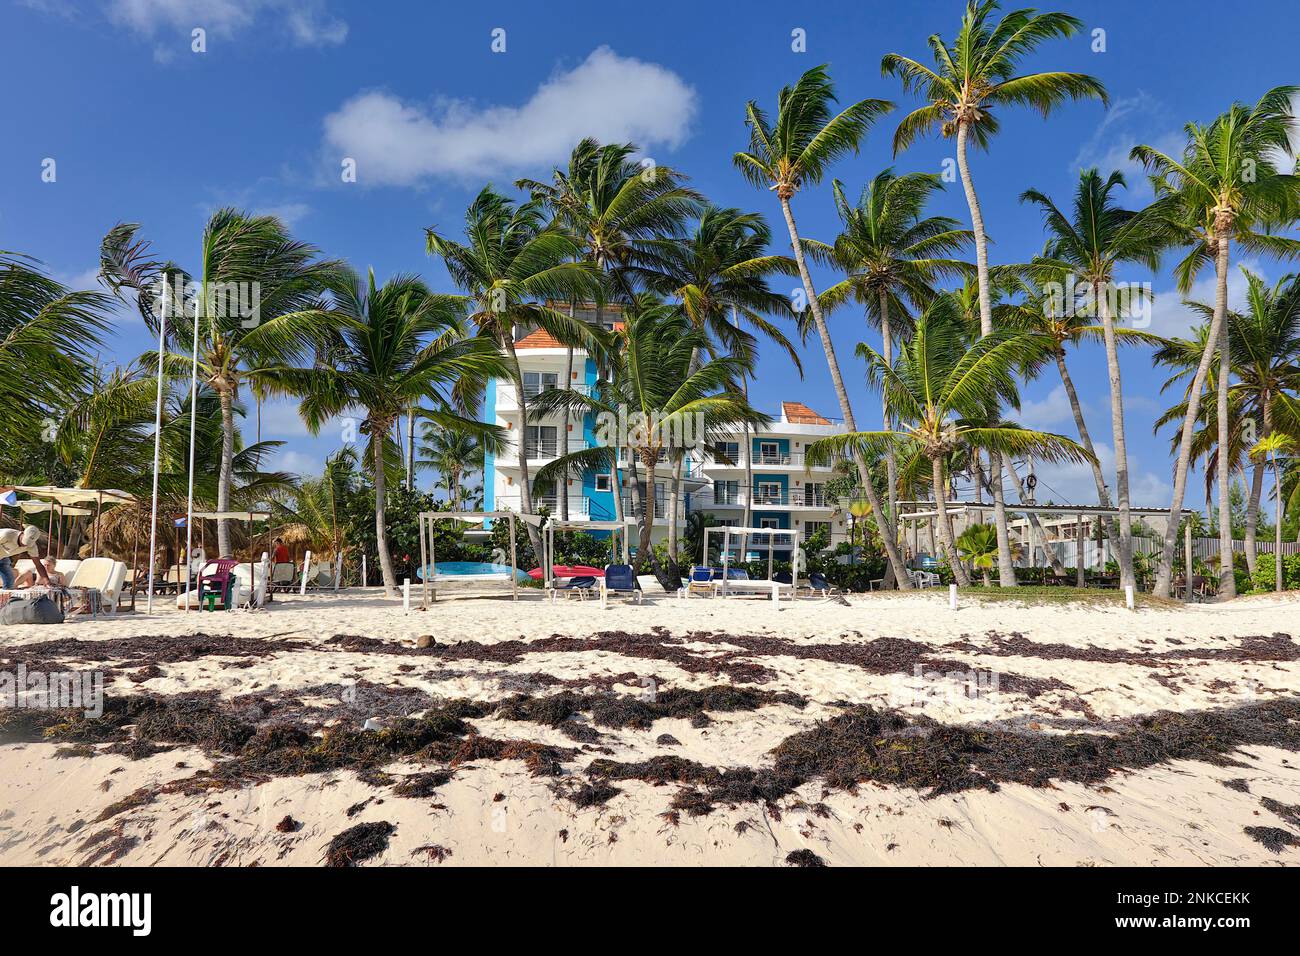 Beach polluted with seaweed in front of a resort, Punta el Cortecito, Playa Bavaro, Punta Cana, Dominican Republic, Caribbean, Central America Stock Photo